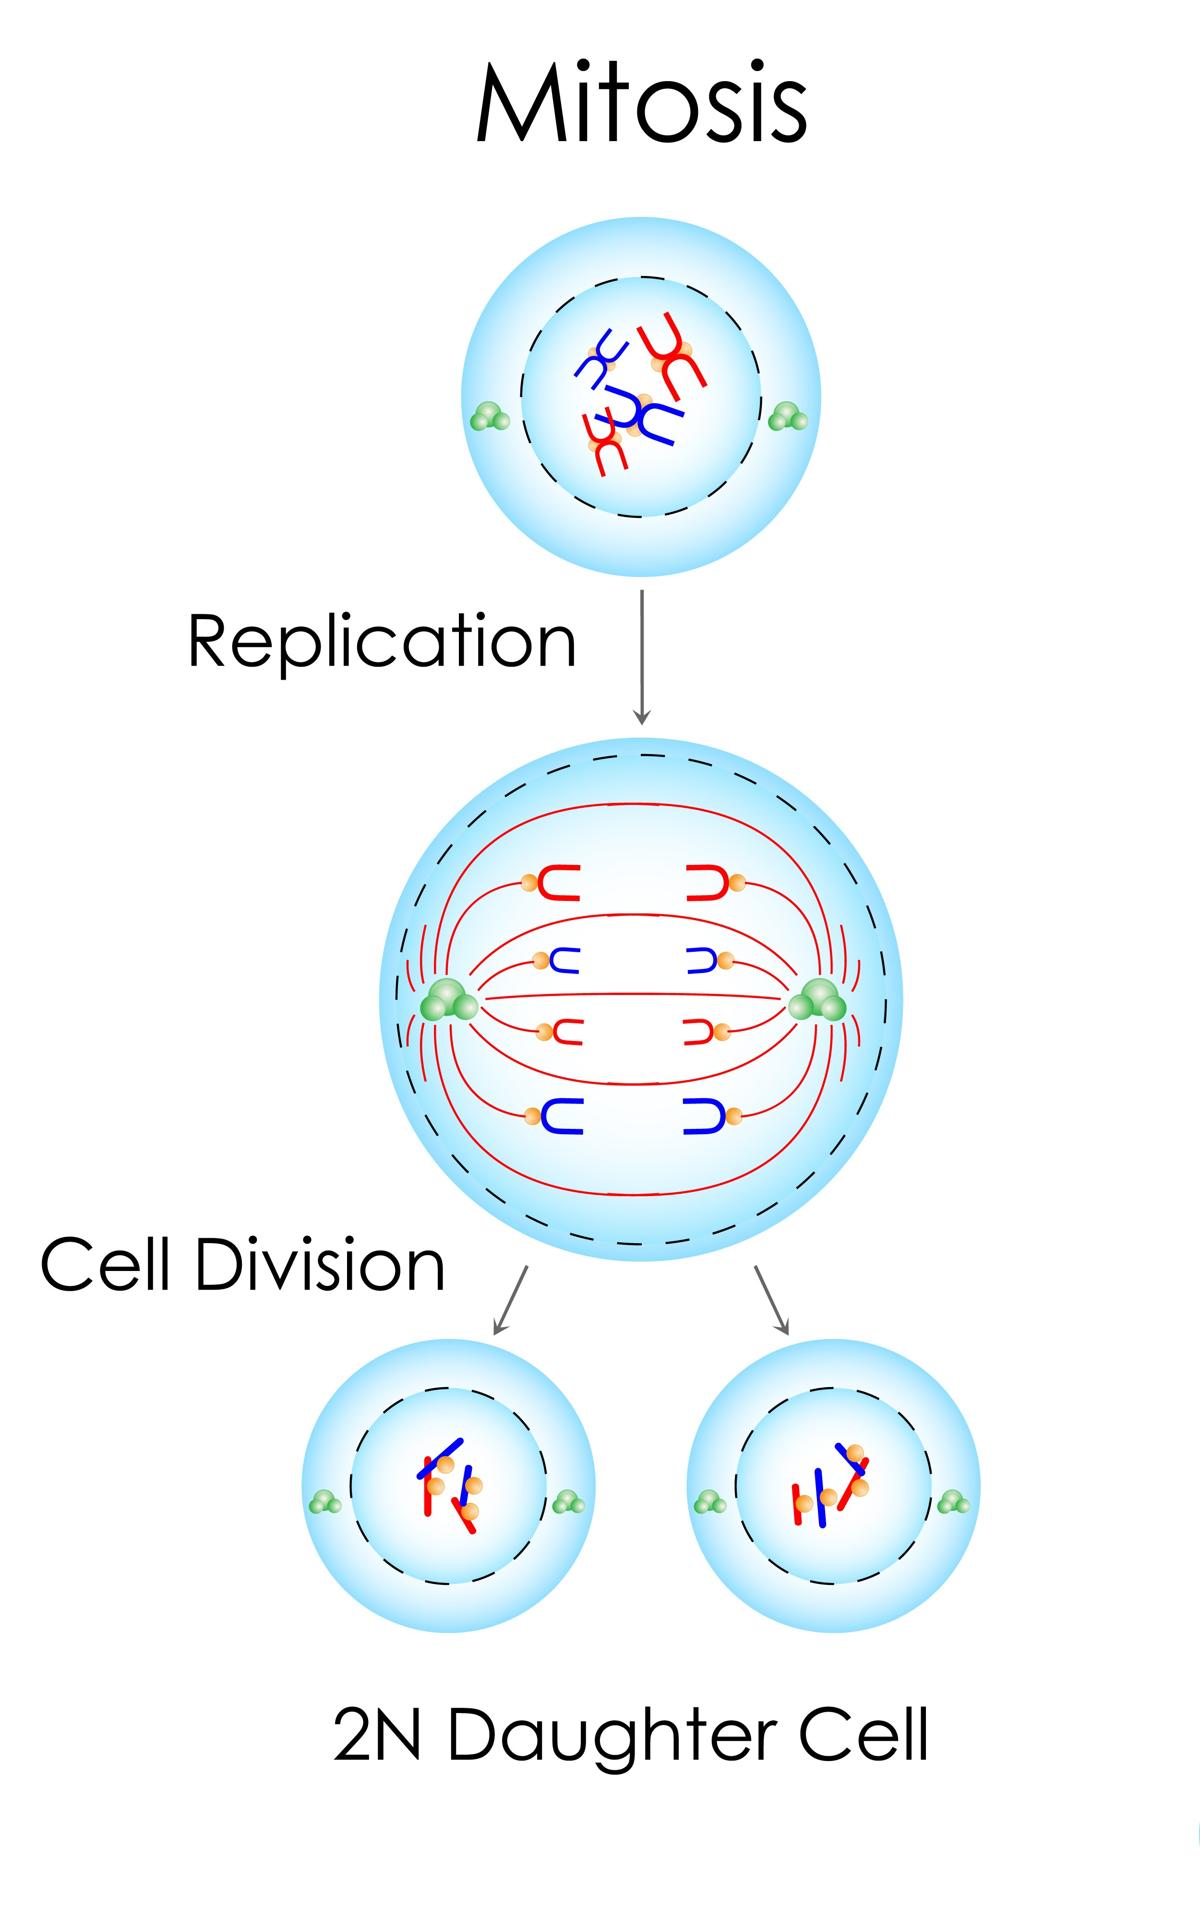 Types of Cell Division